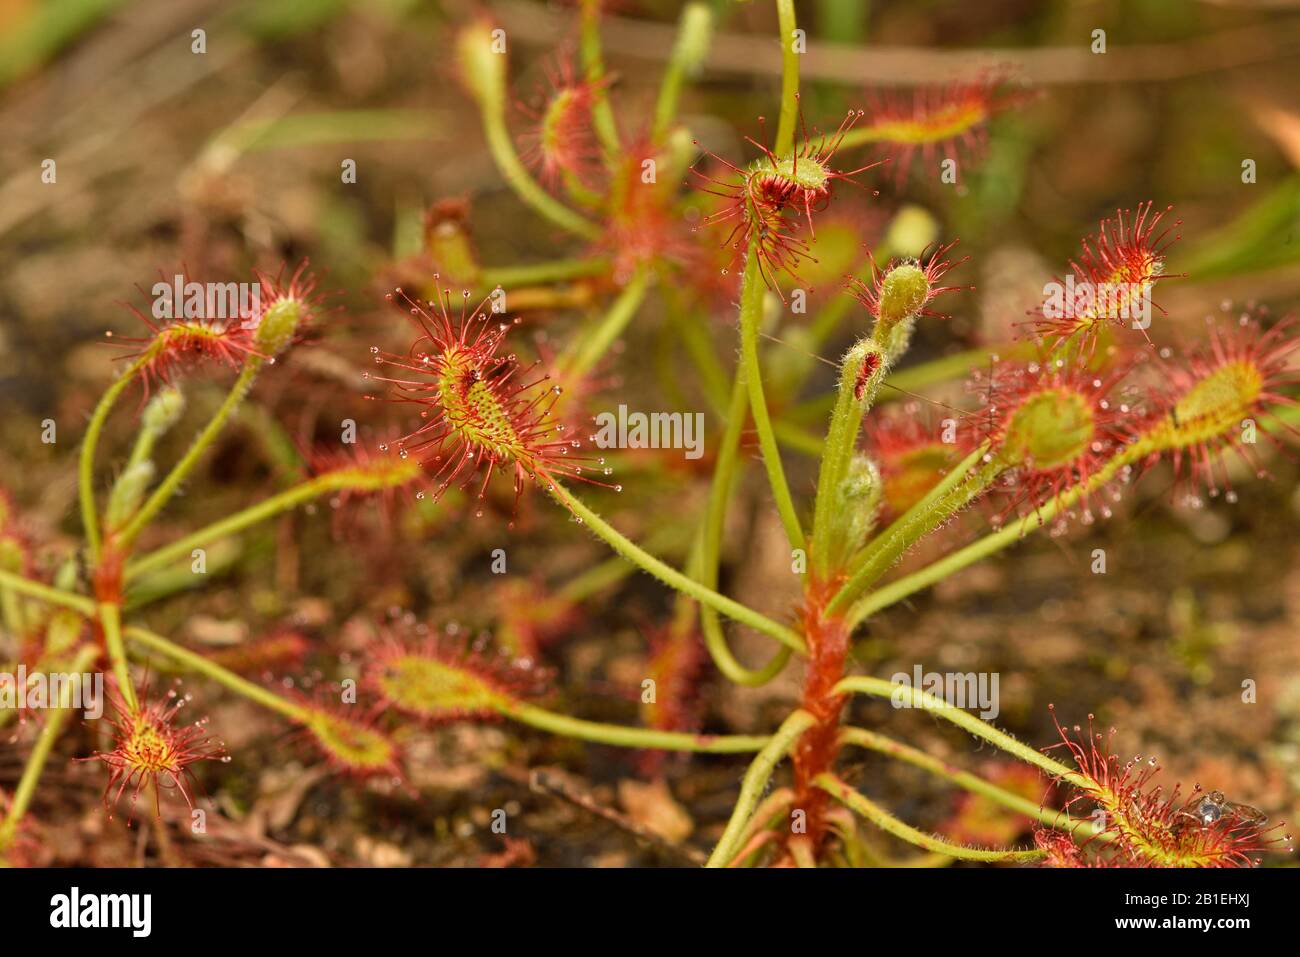 Carnivorous Drosera Plant High Resolution Stock Photography And Images Alamy